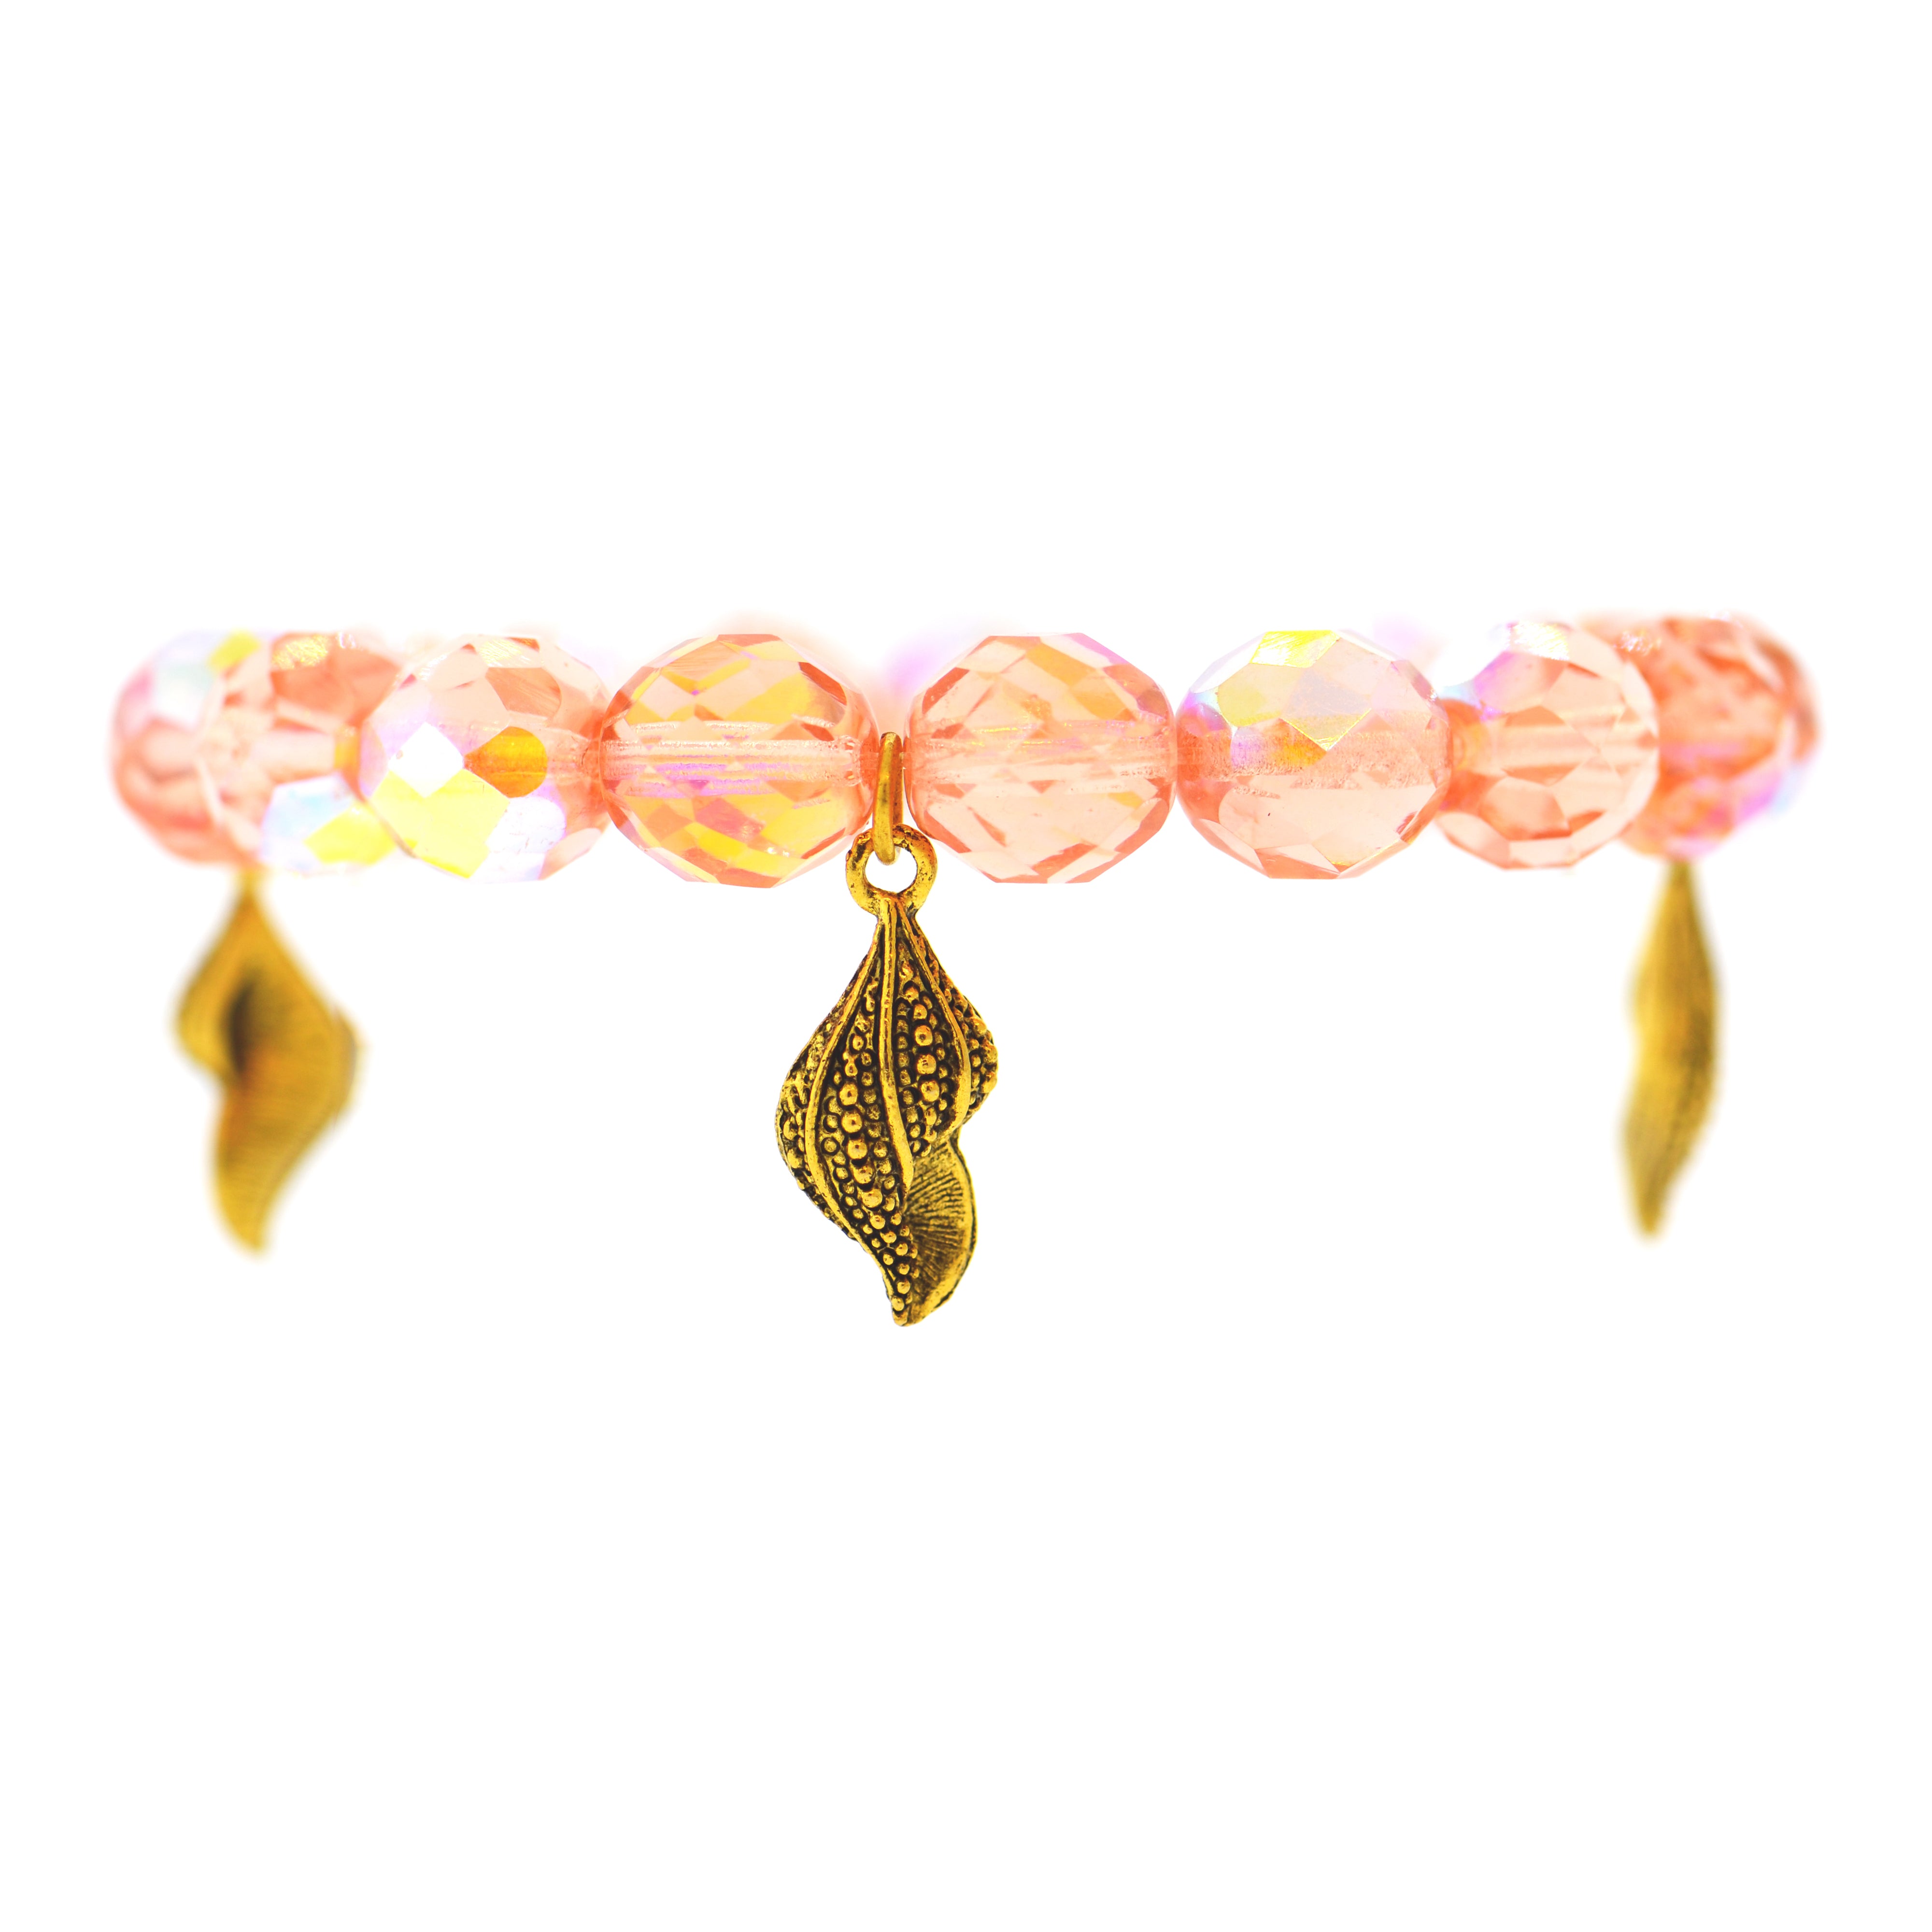 Iridescent Rose Peach Galapagos Conch Shell Bracelet